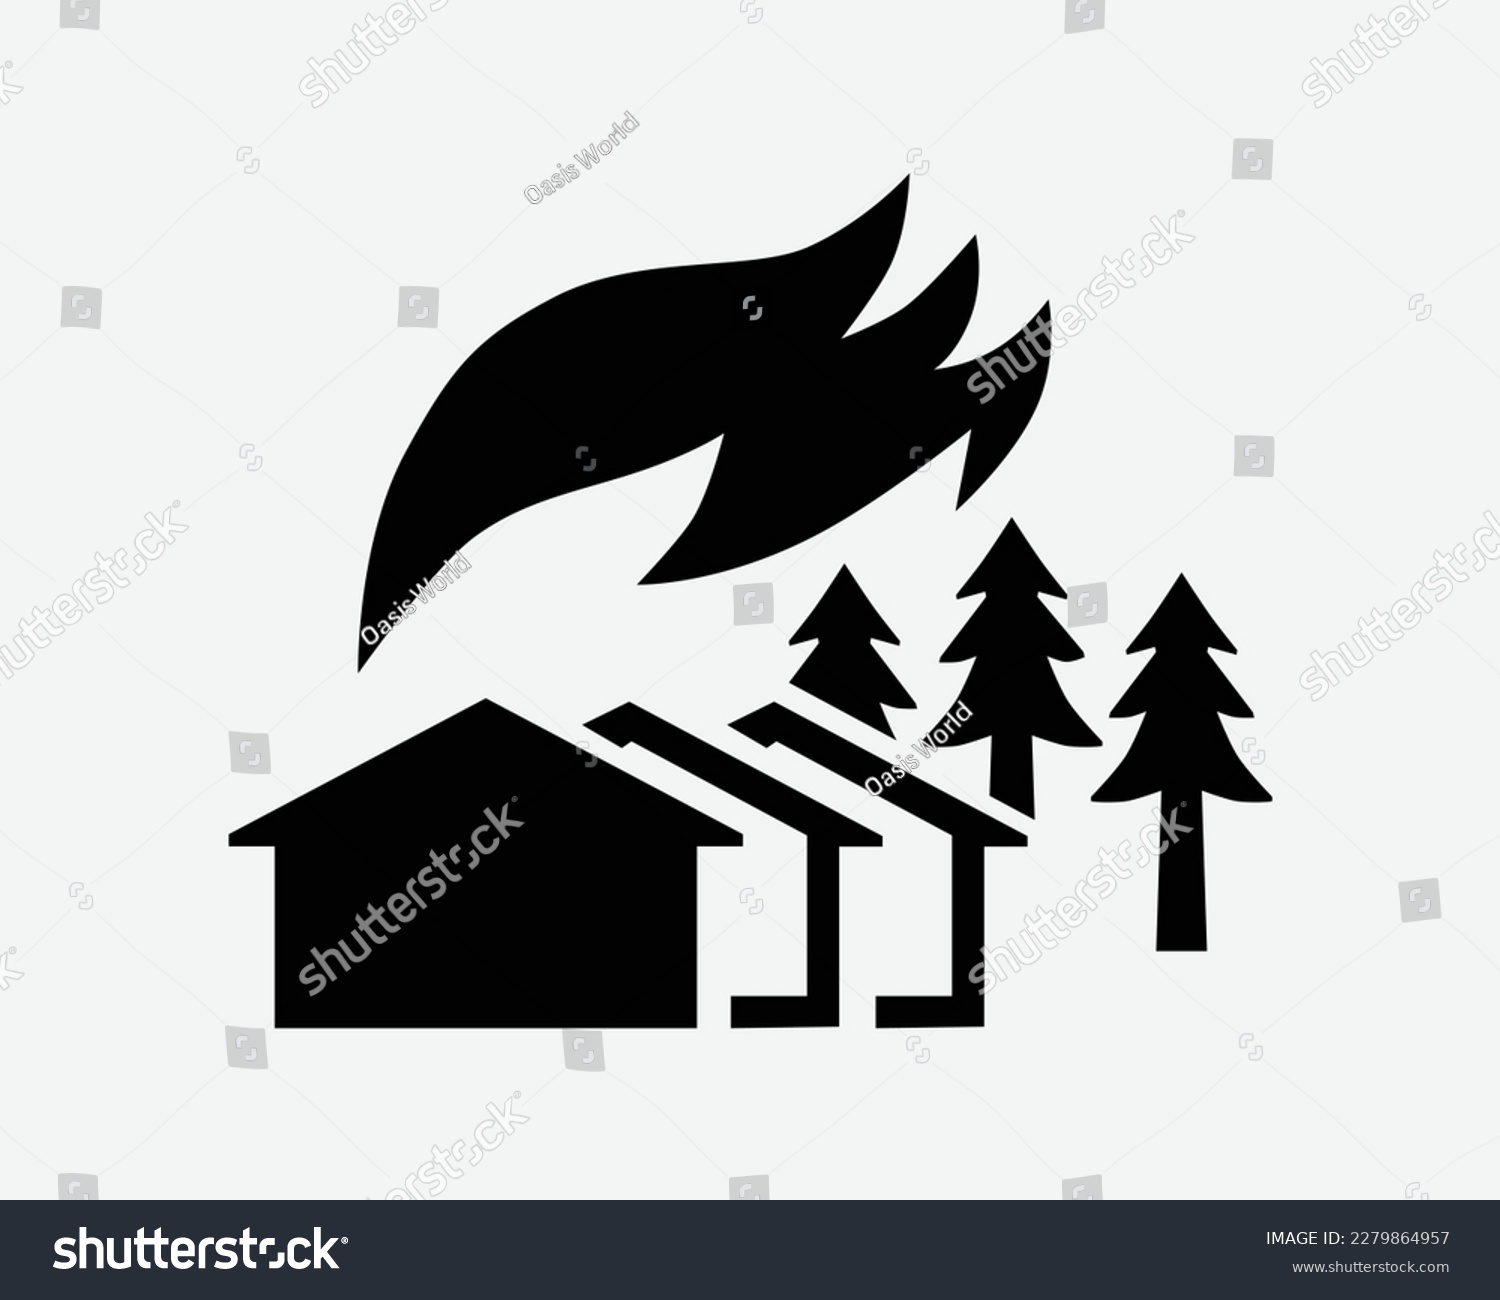 SVG of Wildfire Icon Wild Forest Fire Burn Burning Flames Engulf Disaster Black White Silhouette Symbol Sign Graphic Clipart Artwork Illustration Pictogram svg